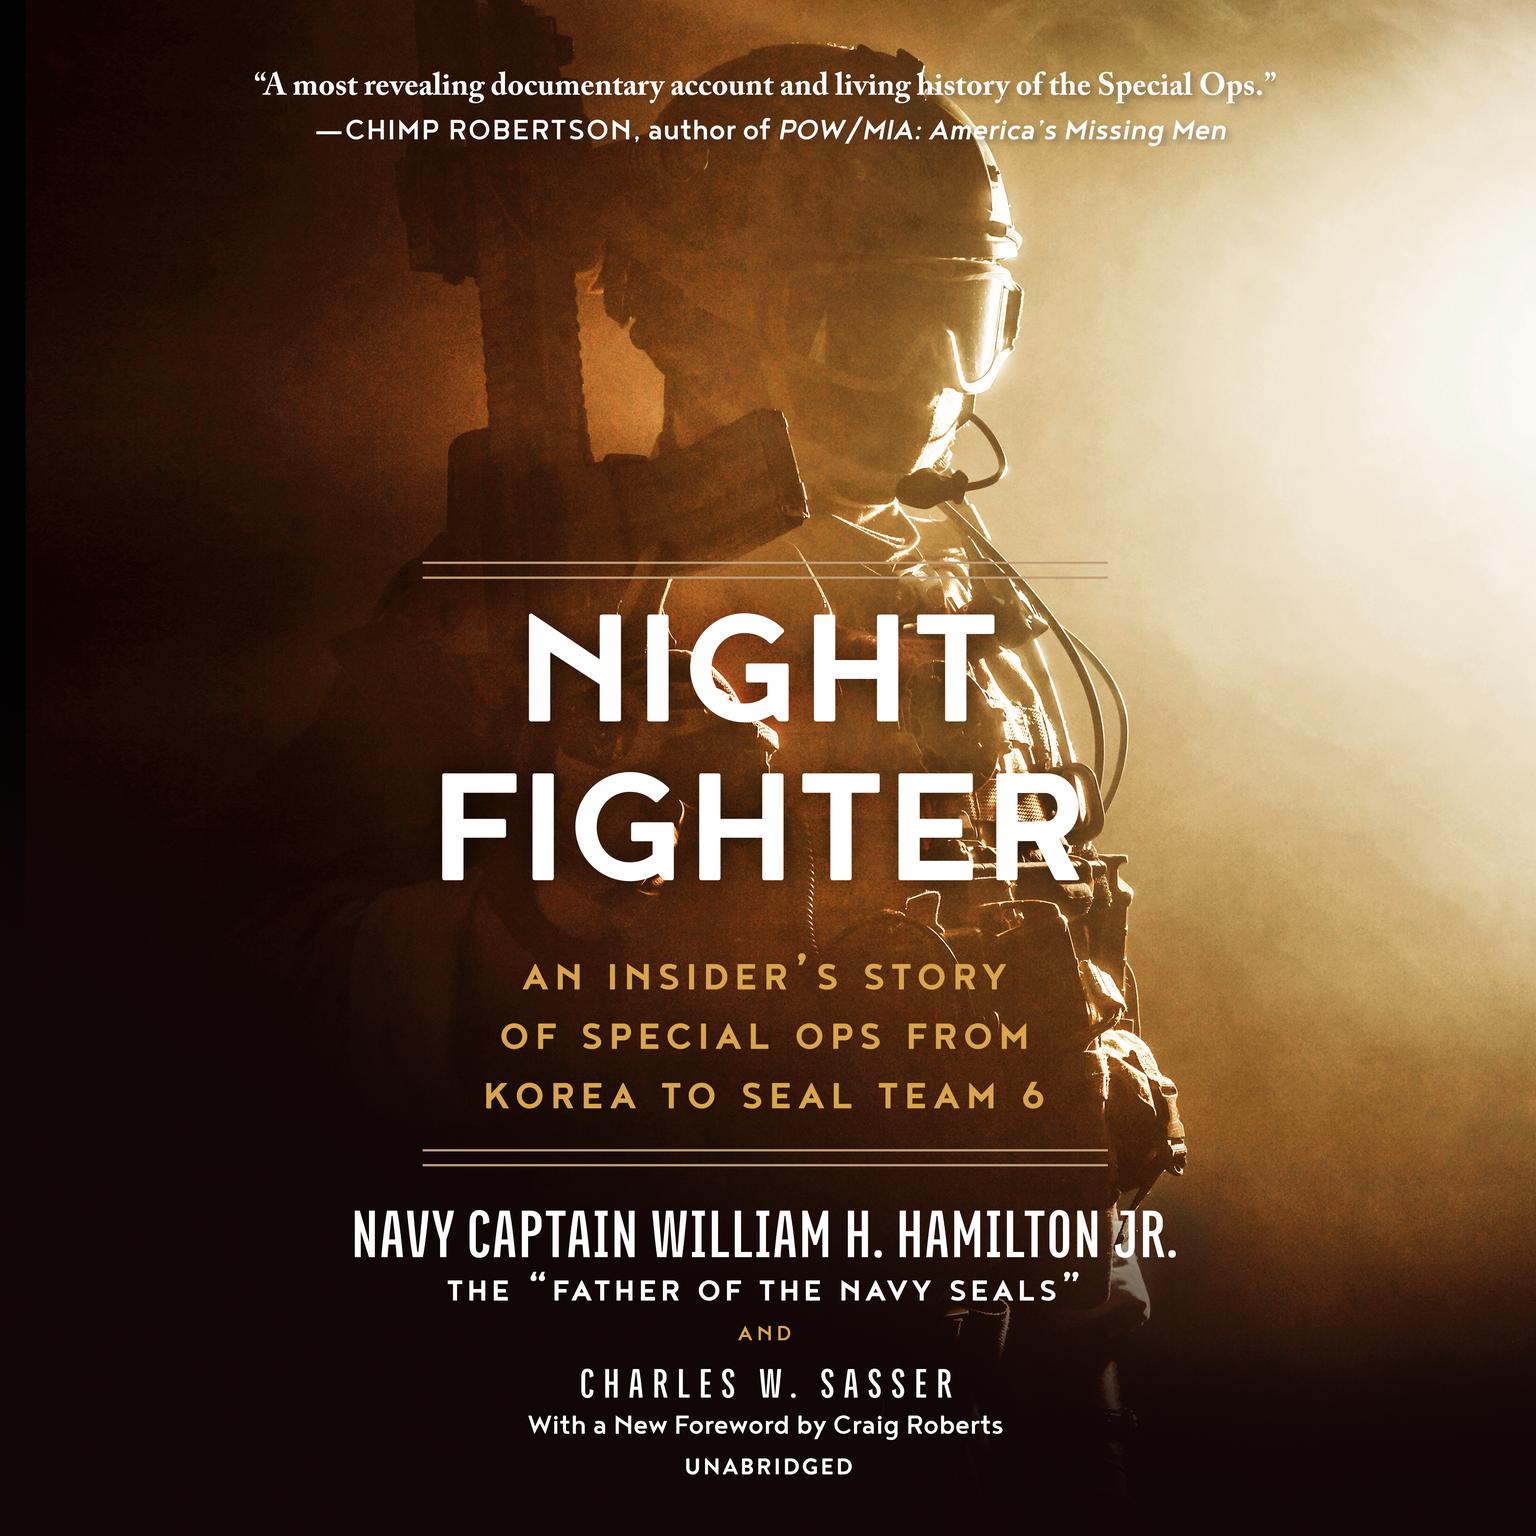 Night Fighter: An Insider’s Story of Special Ops from Korea to SEAL Team 6 Audiobook, by William H. Hamilton